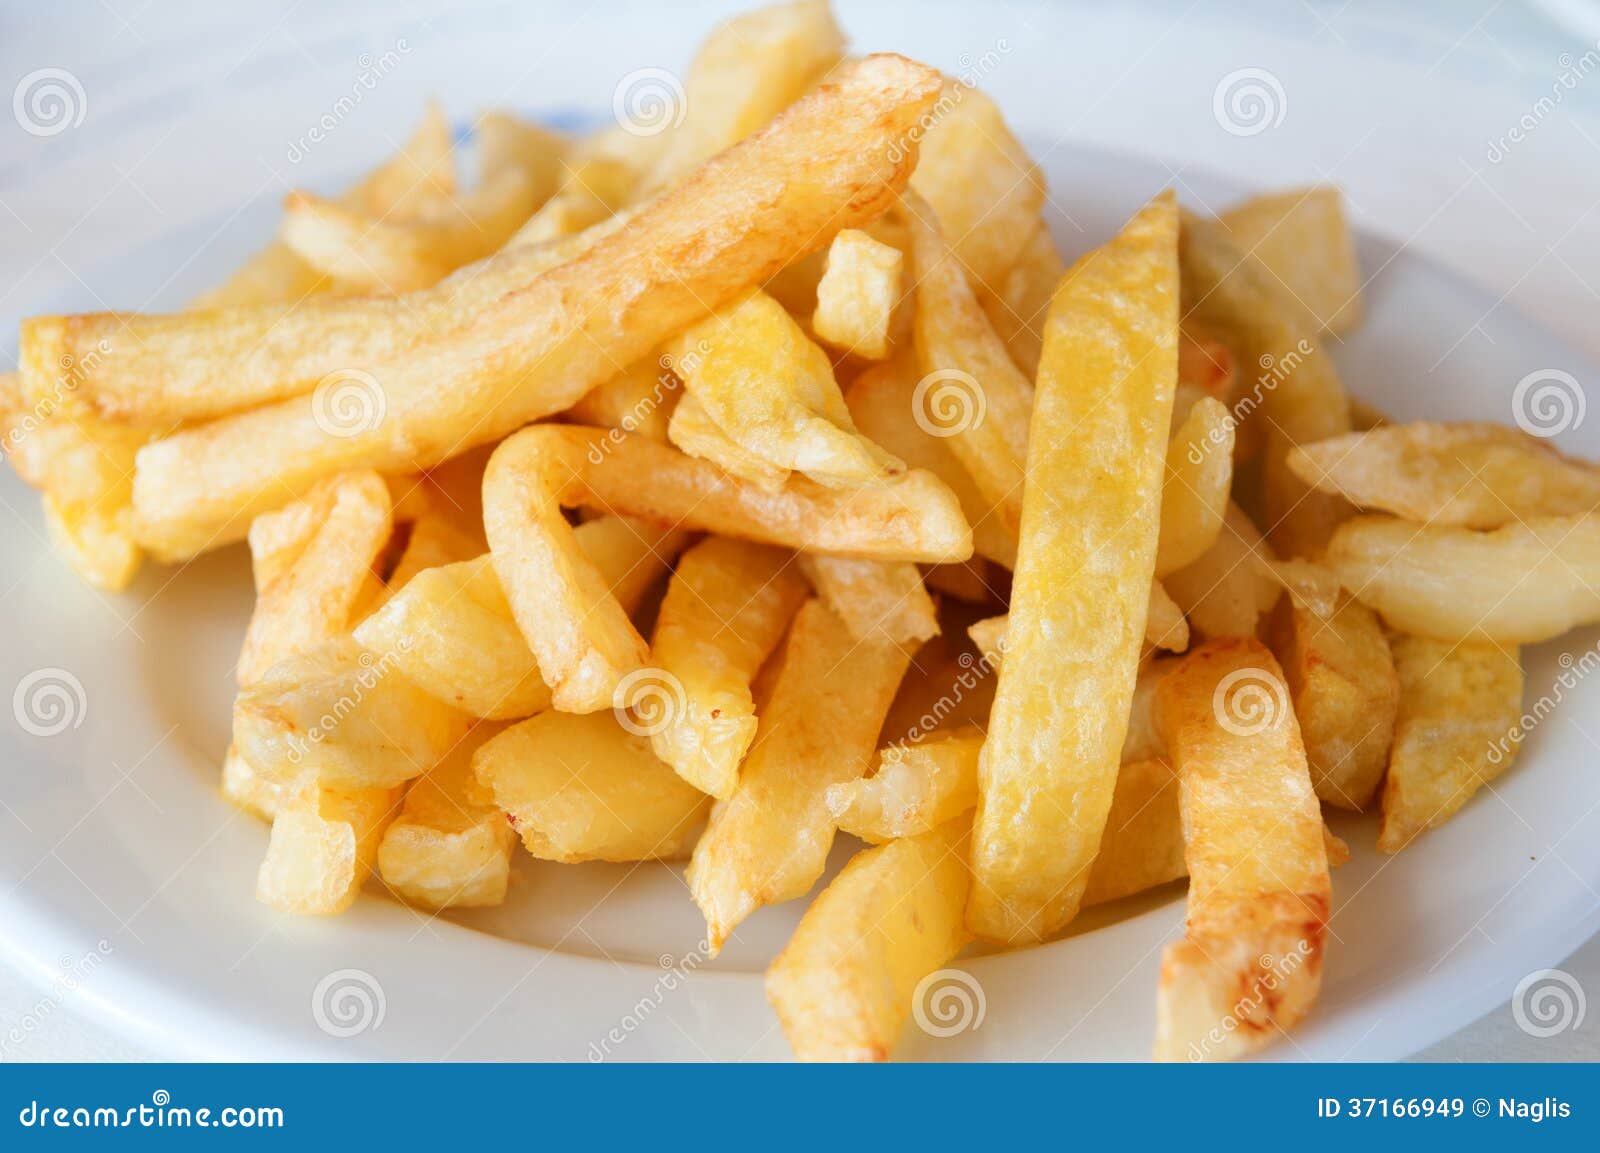 French fries stock image. Image of fast, yellow, frites - 37166949